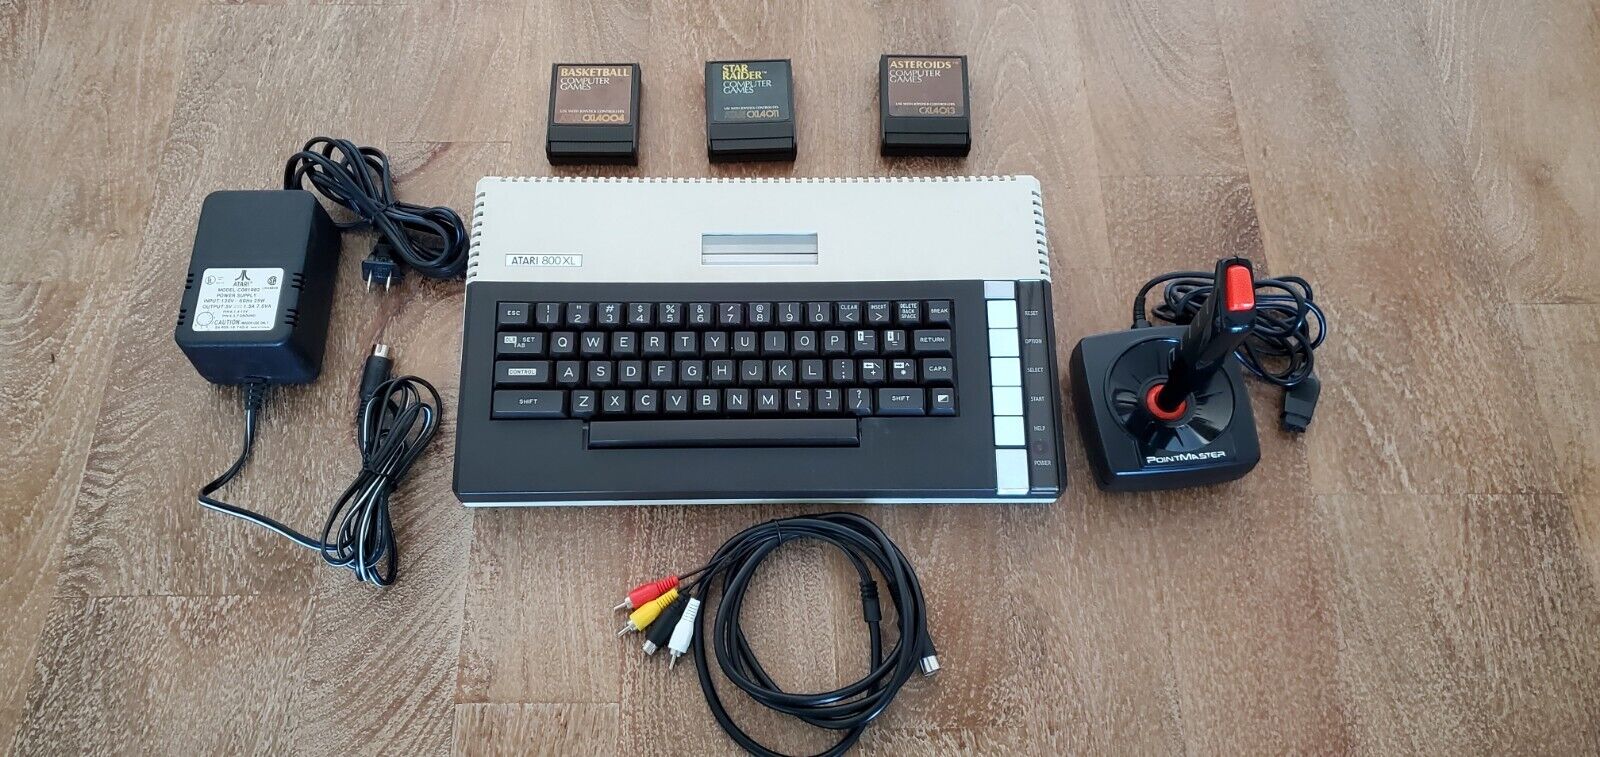 Vintage Atari 800XL Computer with Games and Joystick.  Tested and Works